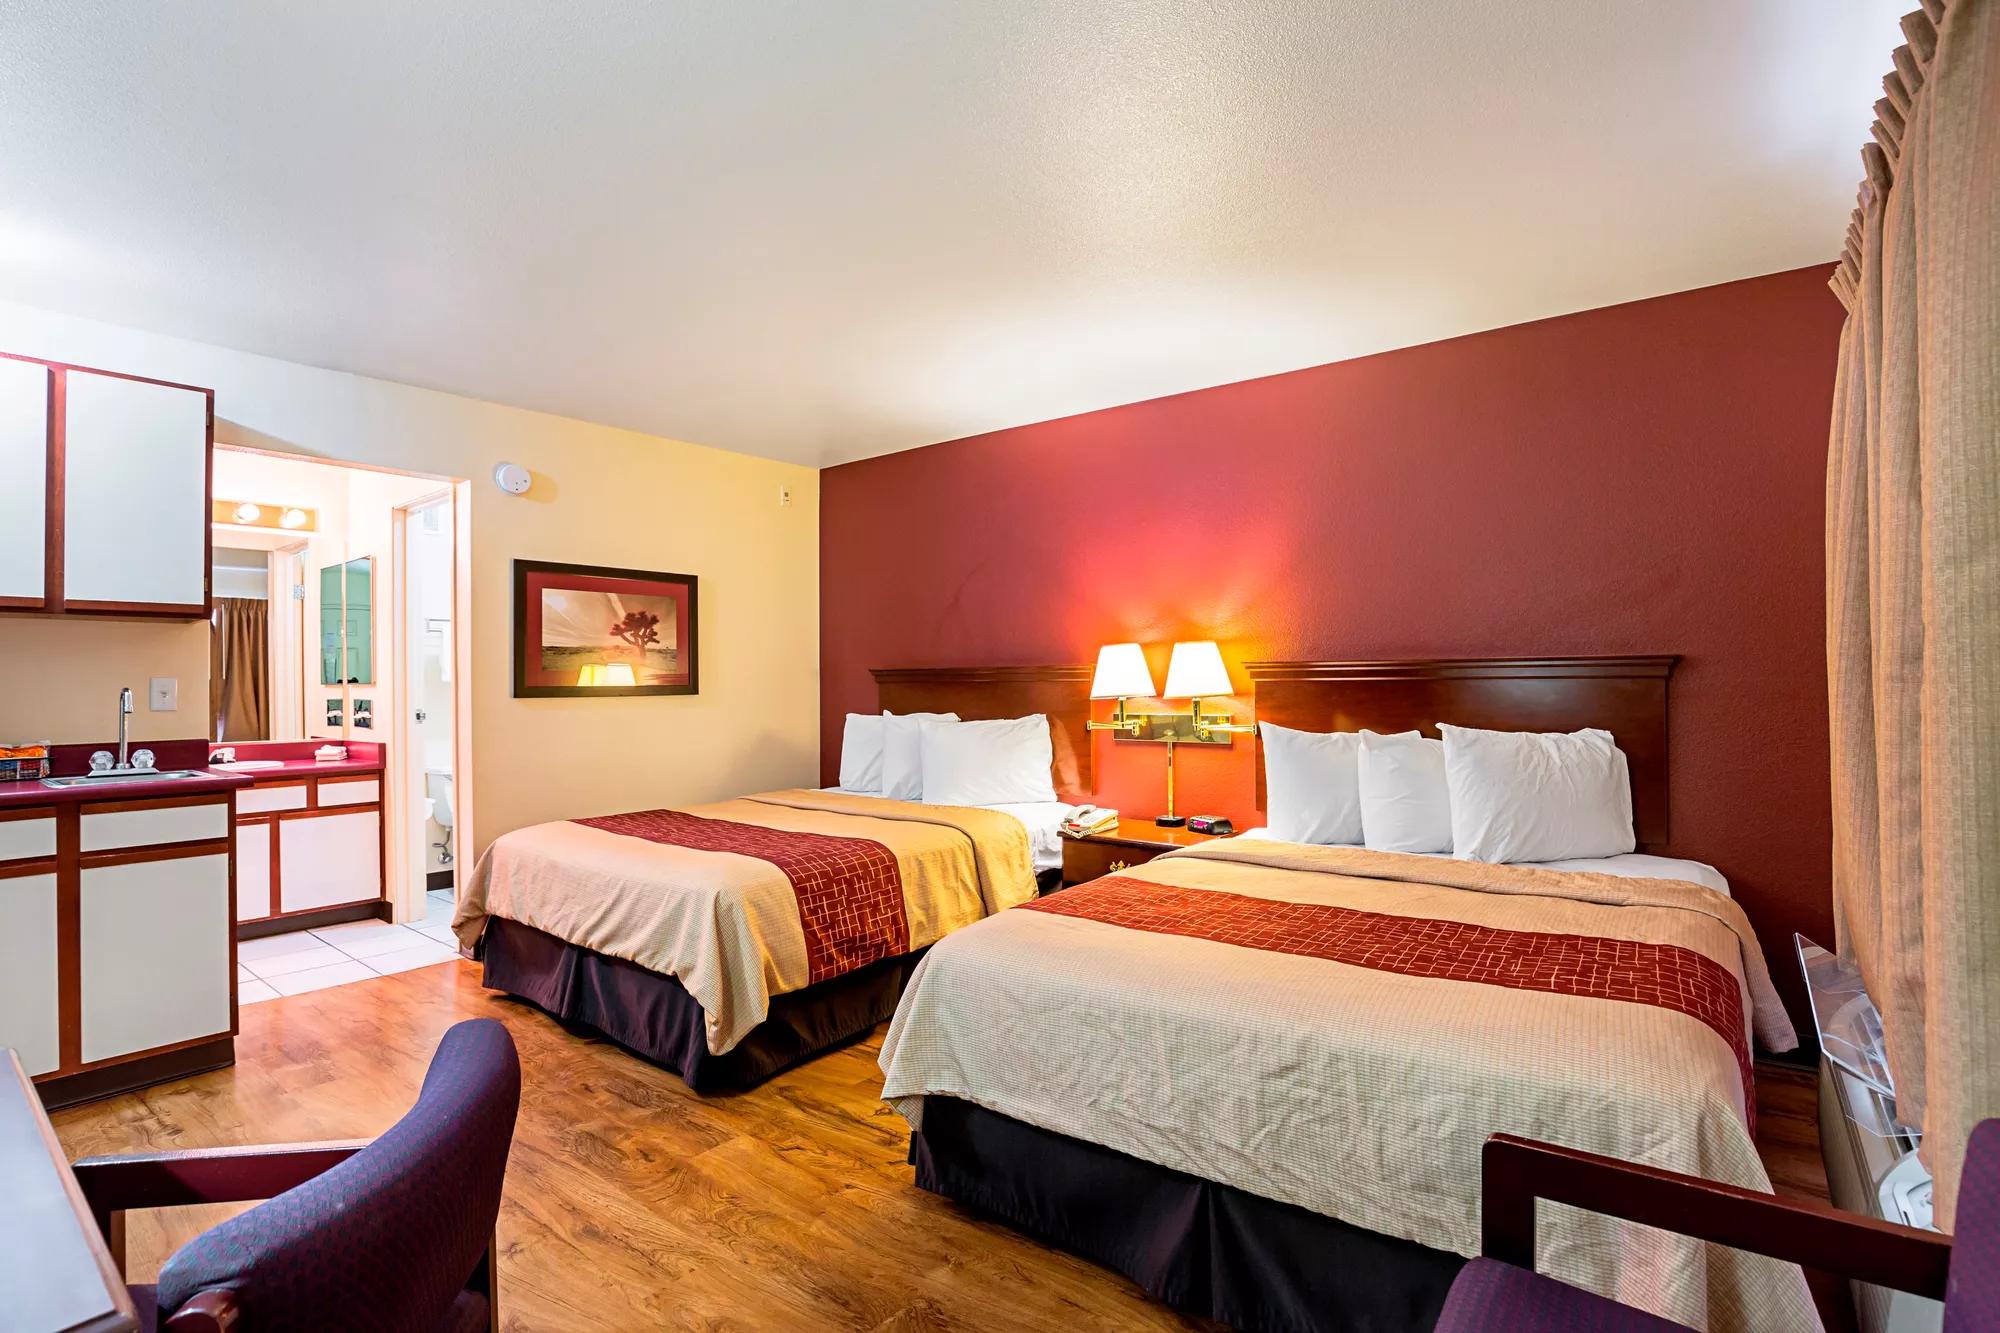 Red Roof Inn Las Vegas Double Bed Room Image Details